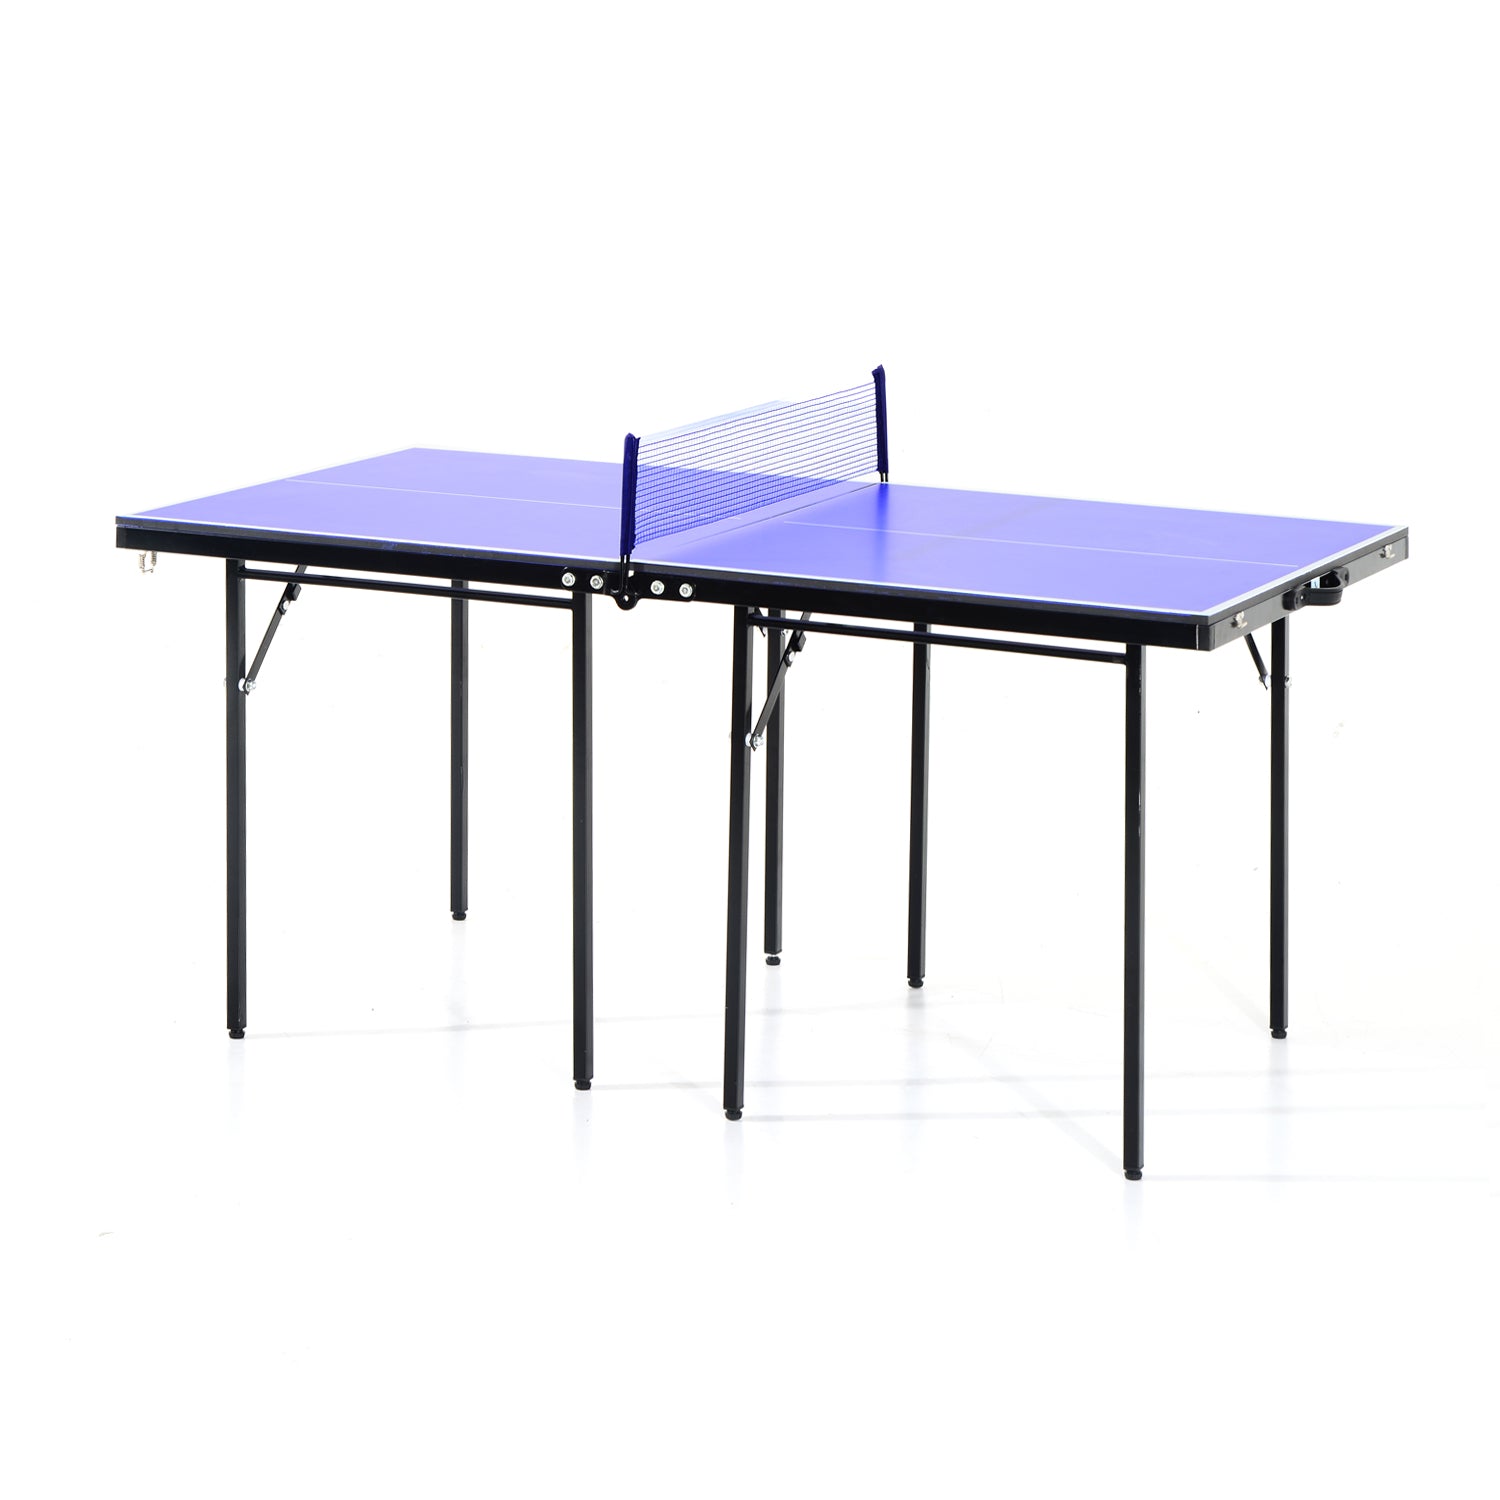 HOMCOM Folding Mini Compact Table Tennis Top Ping Pong Table Set Professional Net Games Sports Training Play Blue - Inspirely